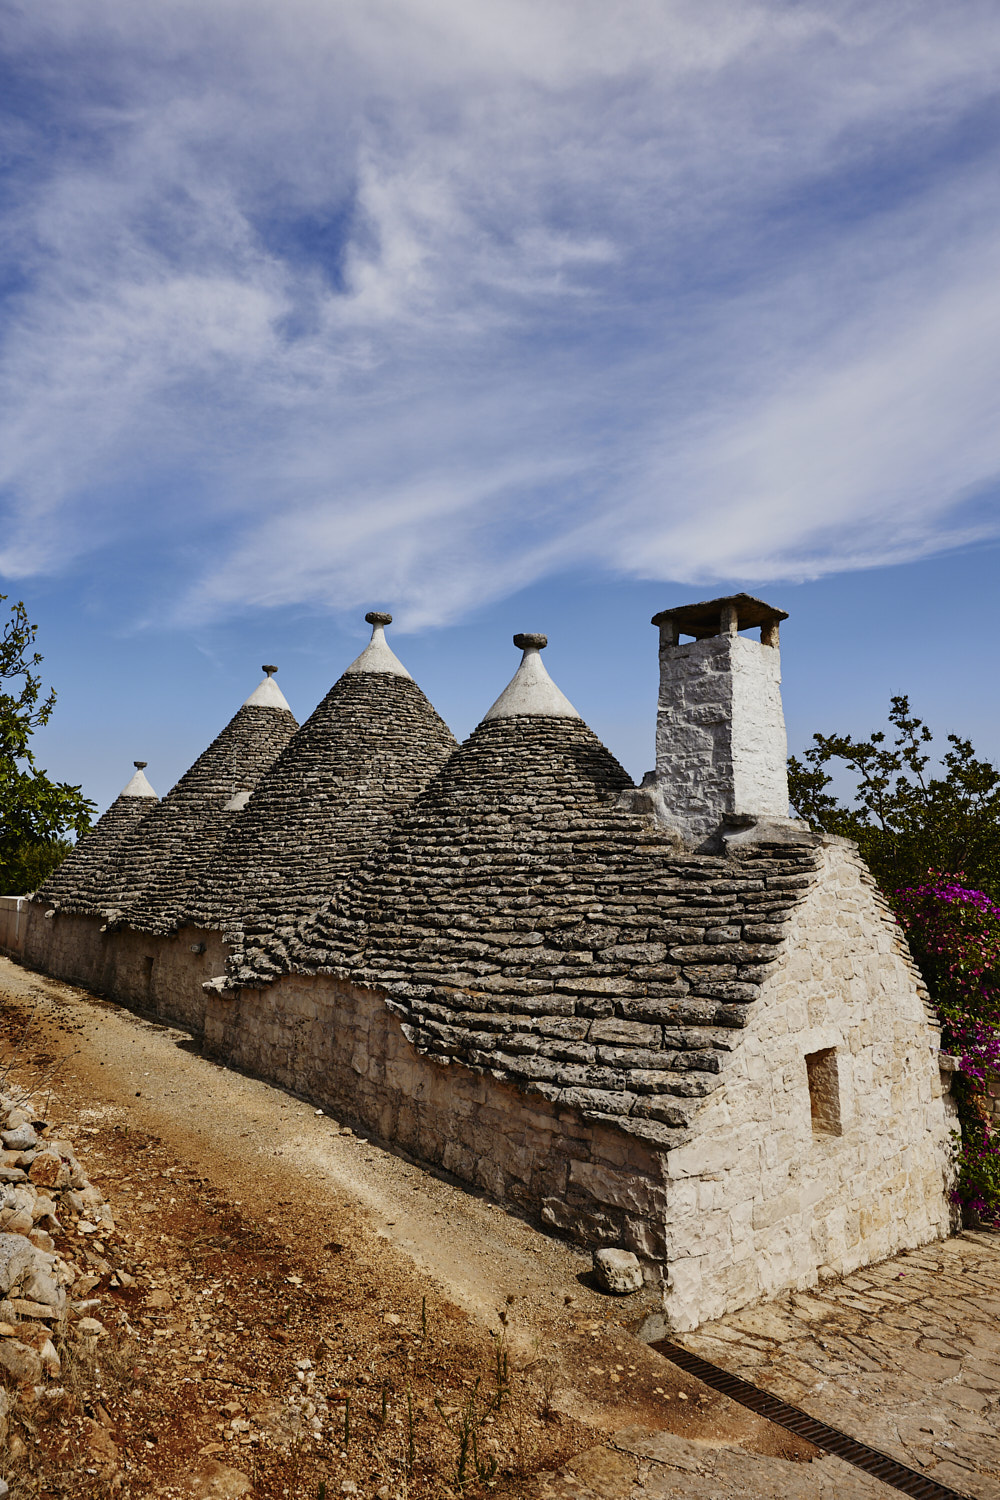 Truly an amazing stay in a Trulli at Alberobello, Italy